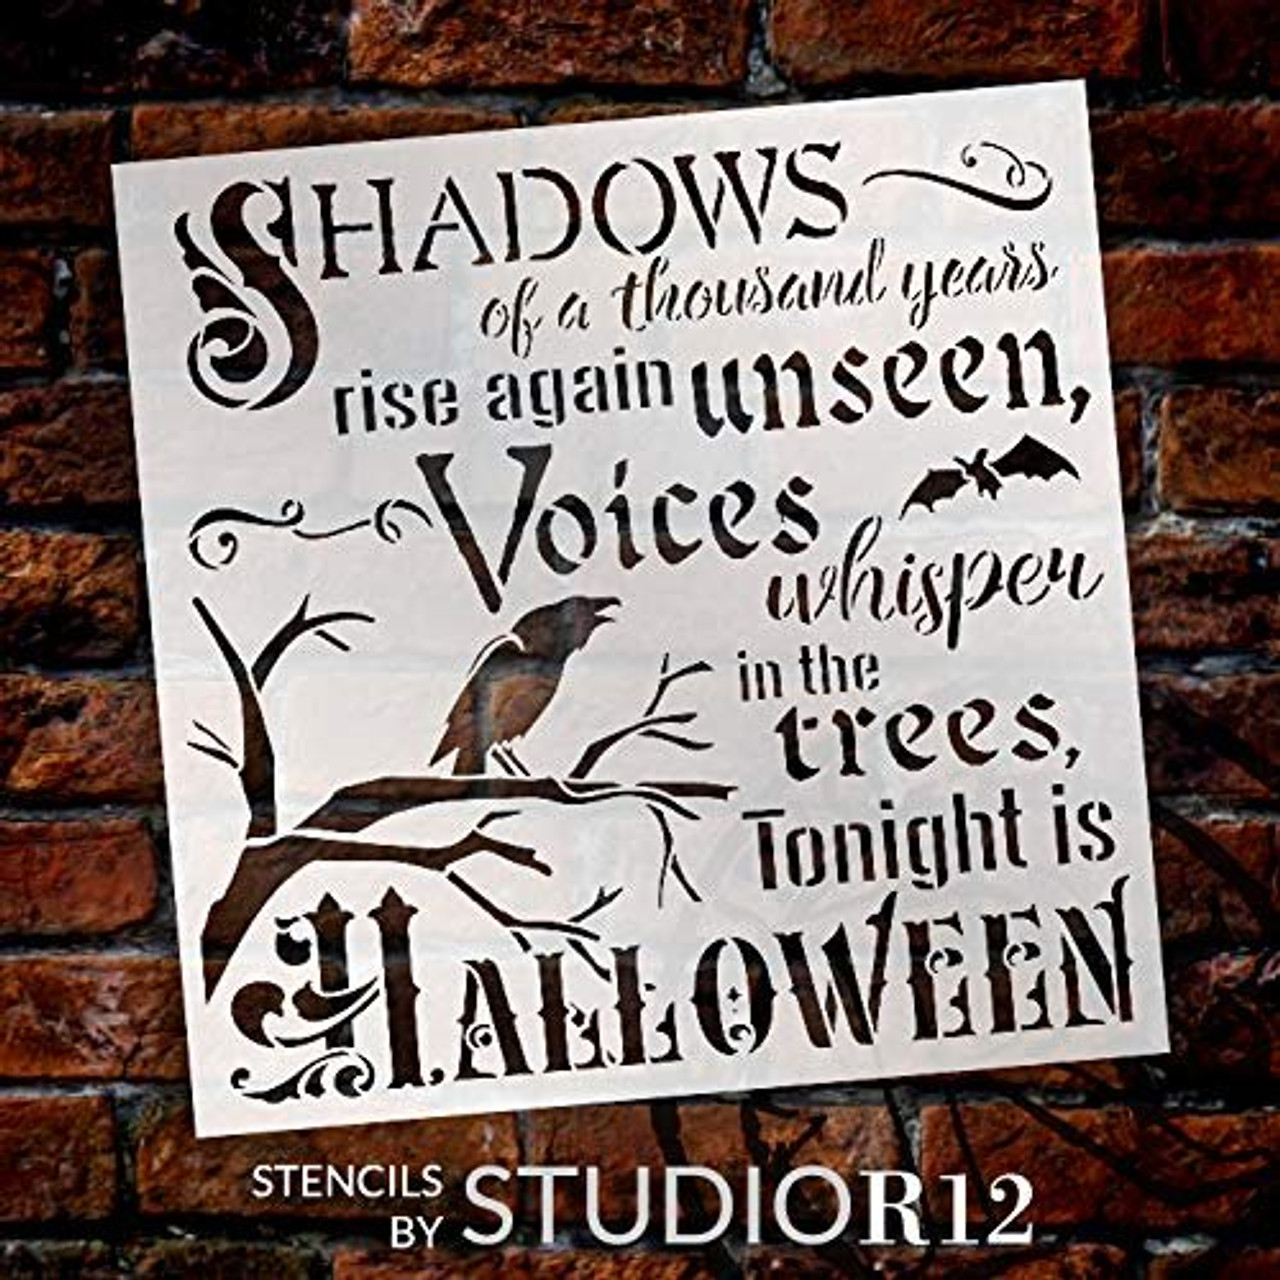 Tonight is Halloween Stencil with Crow & Bat by StudioR12 | DIY Fall October Home Decor | Craft & Paint Wood Signs | Select Size